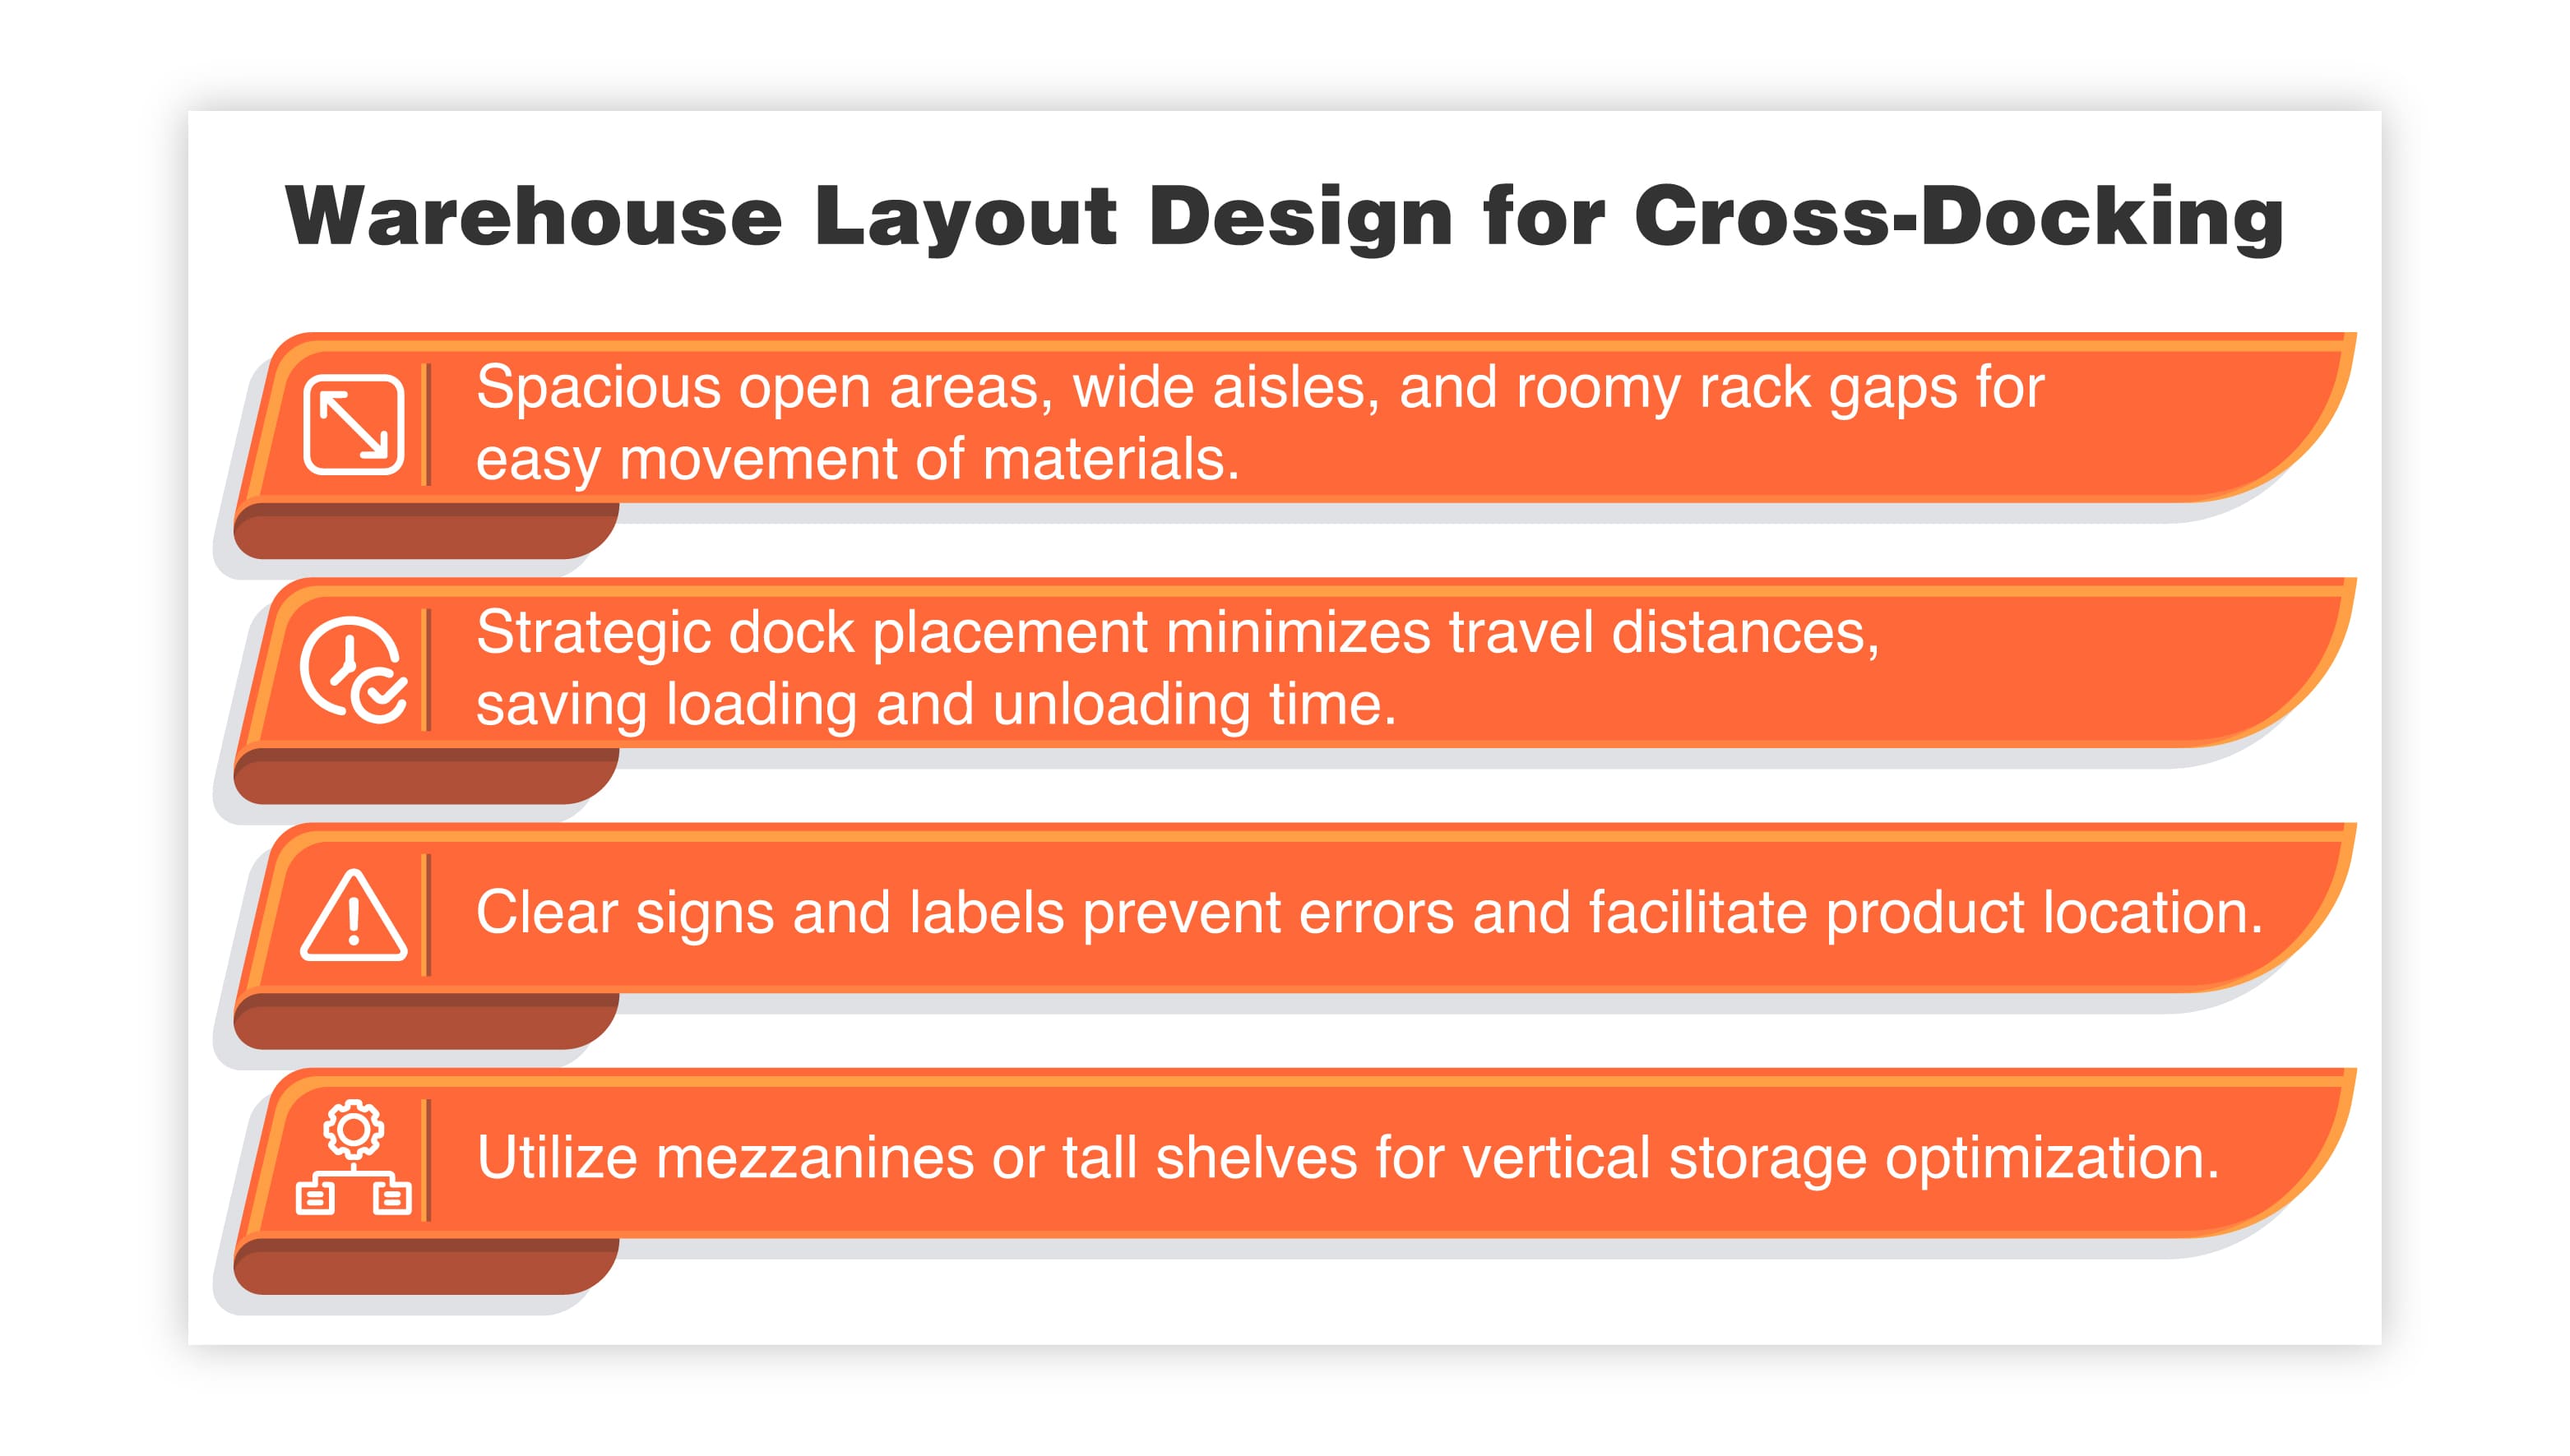 Warehouse Layout Design for Cross-Docking